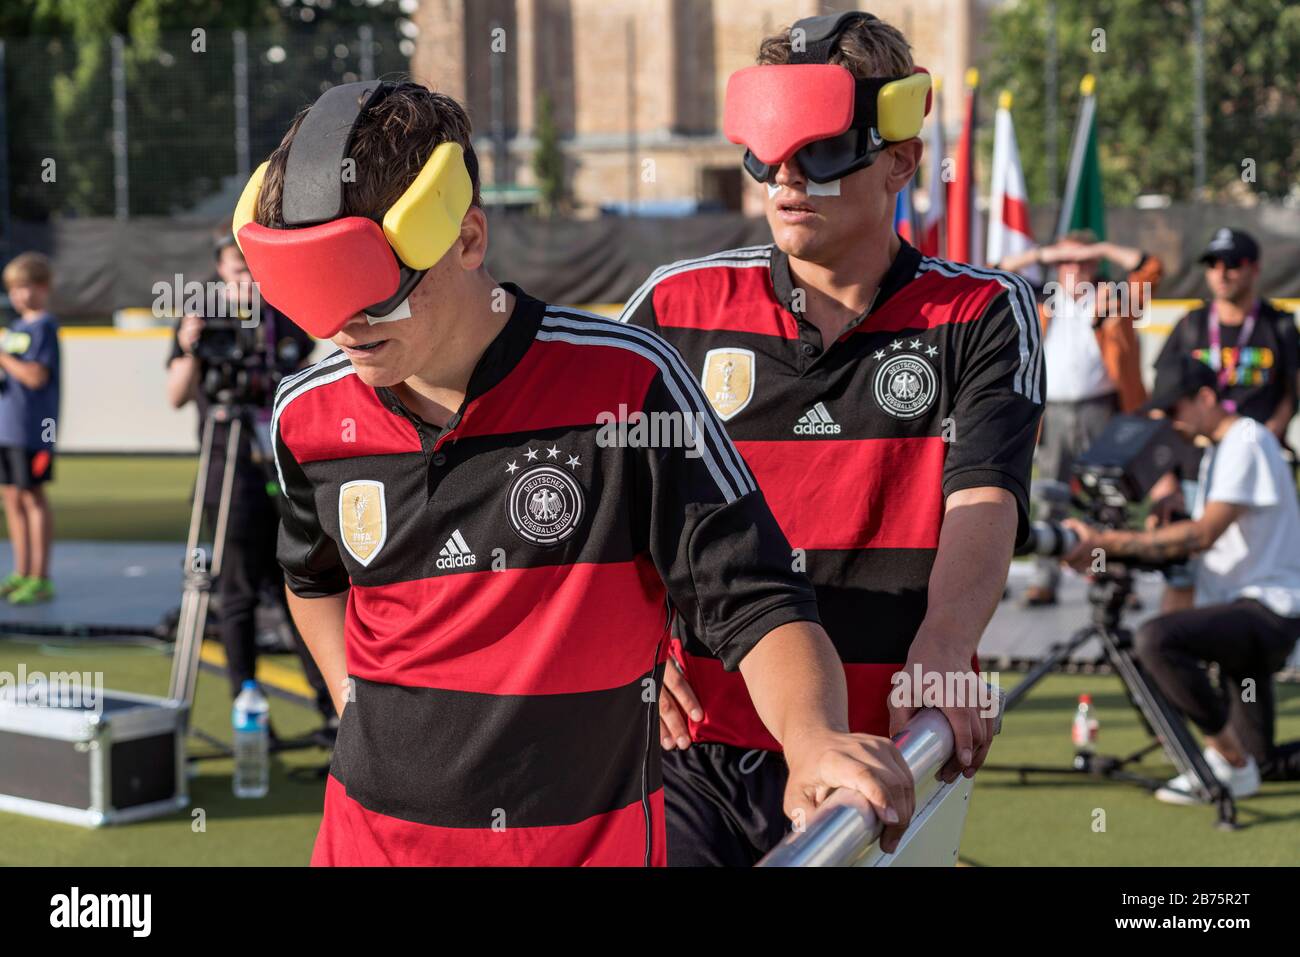 Germany, Berlin, 23.08.2017. European Championship of the International Blind Sport Federation (IBSA) in the stadium at Anhalter Bahnhof on 23.08.2017. The German players Jonathan Toensing (left) and Taimes Kuttig at the game Germany:England. [automated translation] Stock Photo